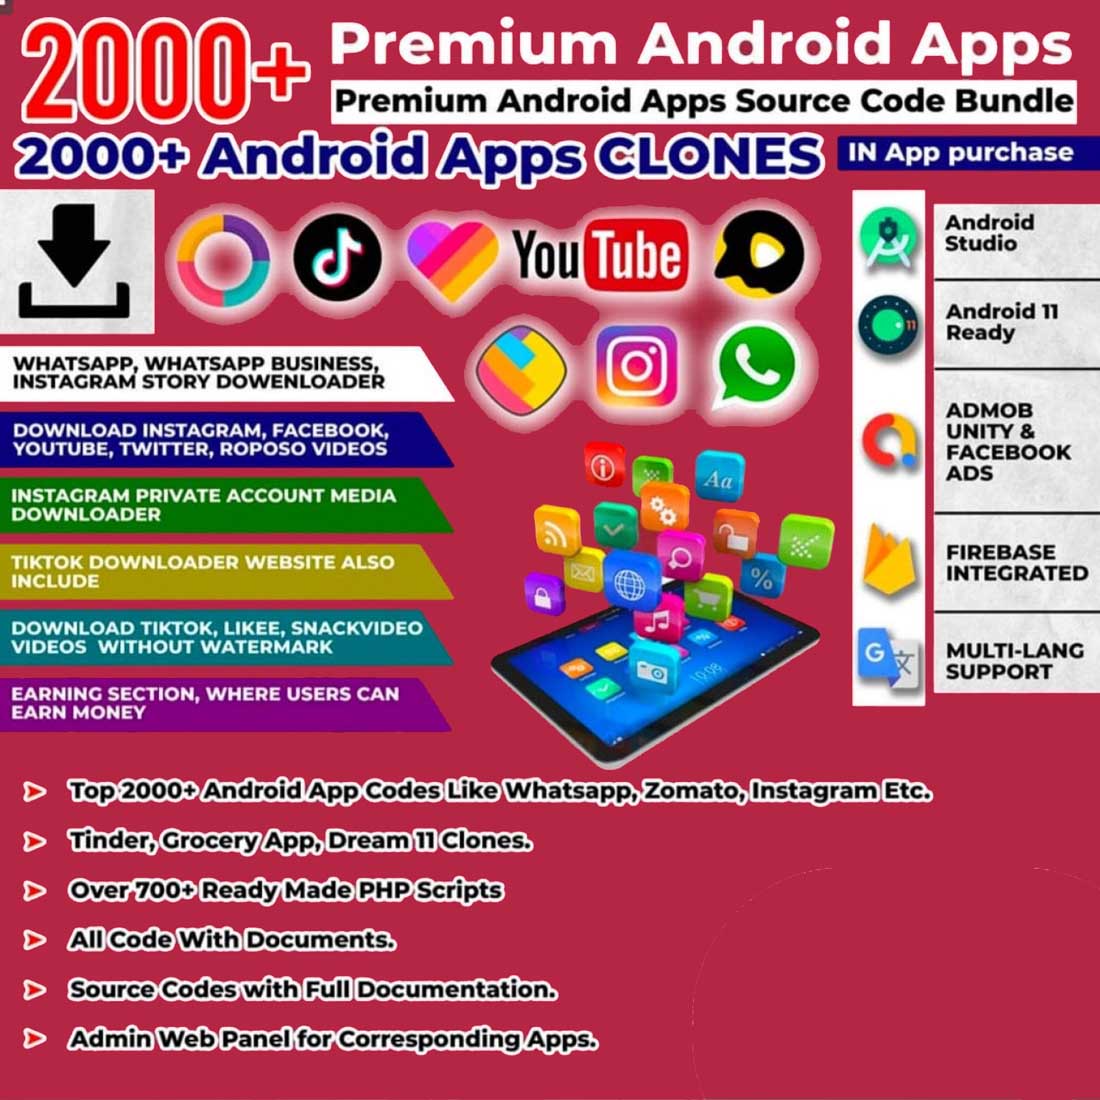 2000+ Android Apps Source Code preview image.